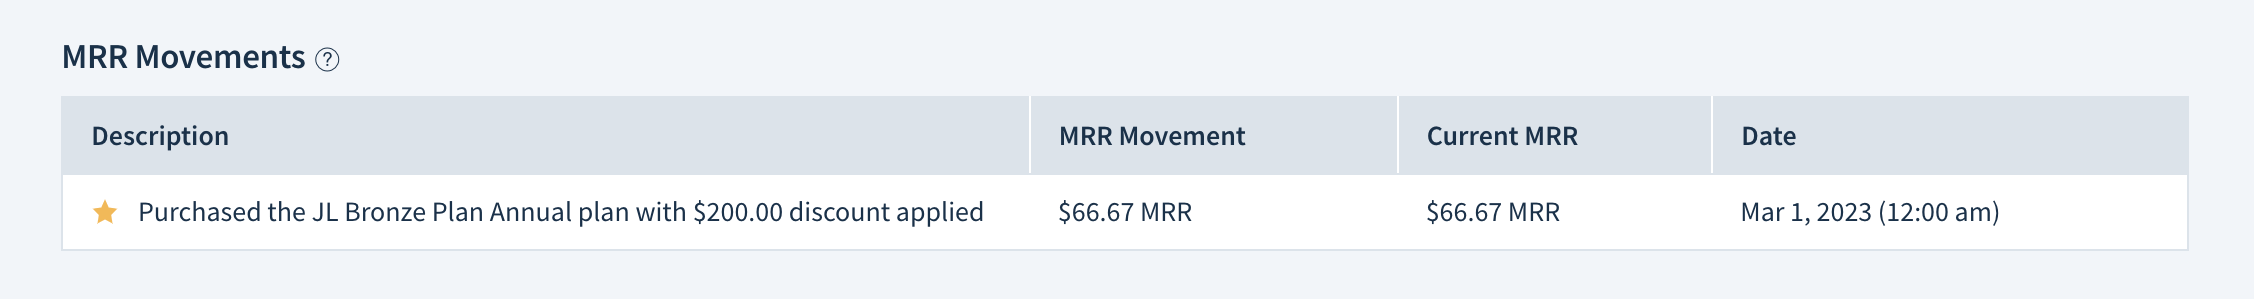 Screenshot of the MRR Movements table. It shows a new business movement of 66.67 dollars described as “Purchased the JL Bronze Annual plan with a 200-dollar discount applied” on March 1st, 2023. Current MRR after this movement is 66.67 dollars.